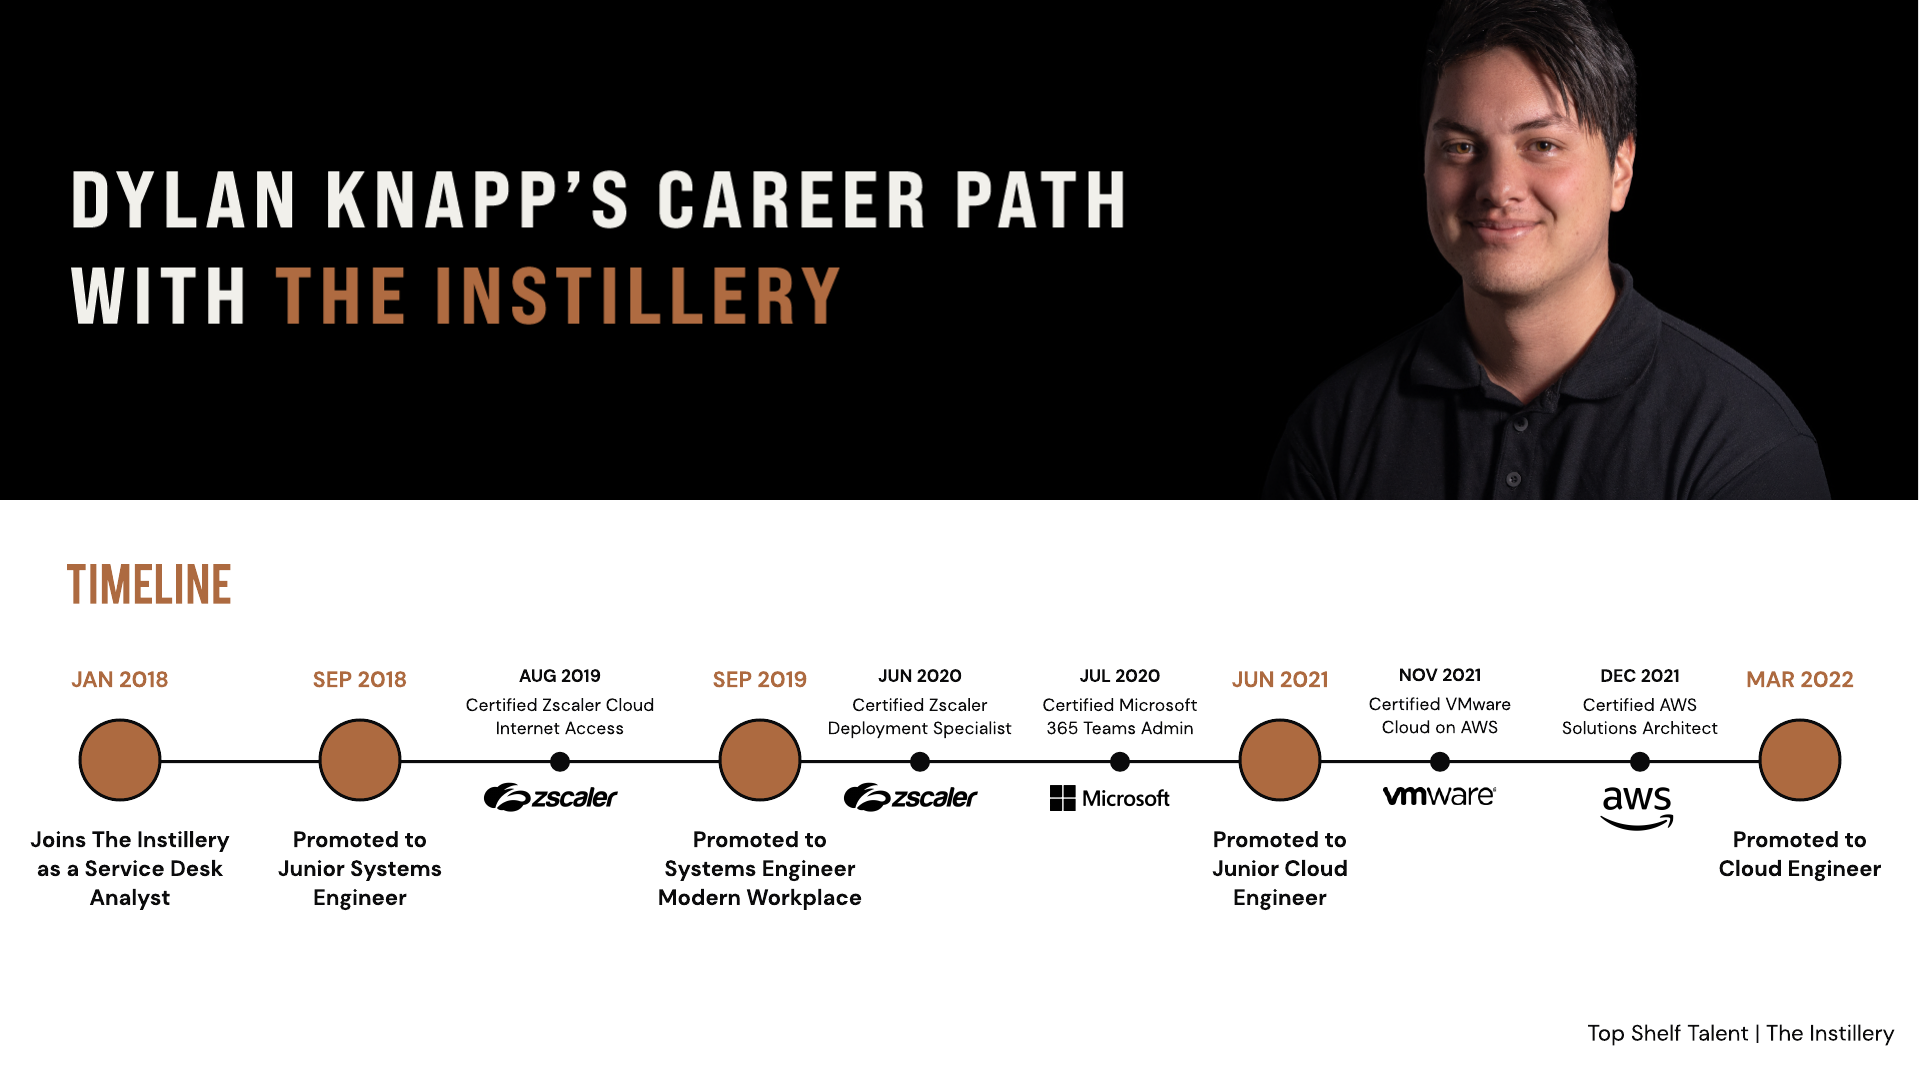 Dylan Knapp's Career Path with The Instillery